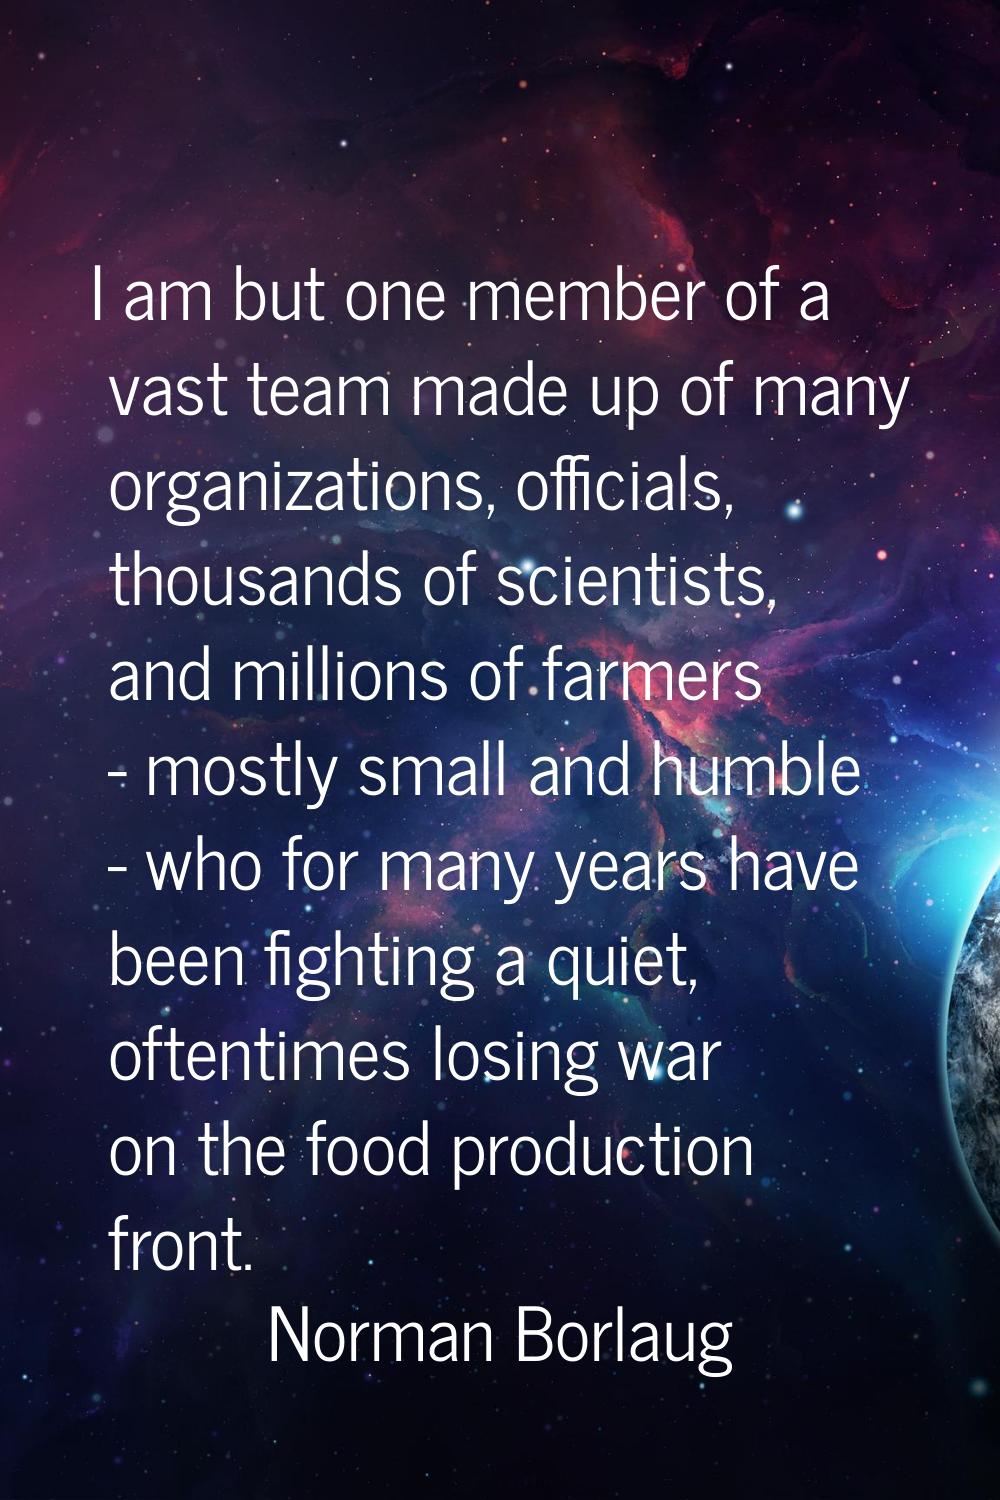 I am but one member of a vast team made up of many organizations, officials, thousands of scientist